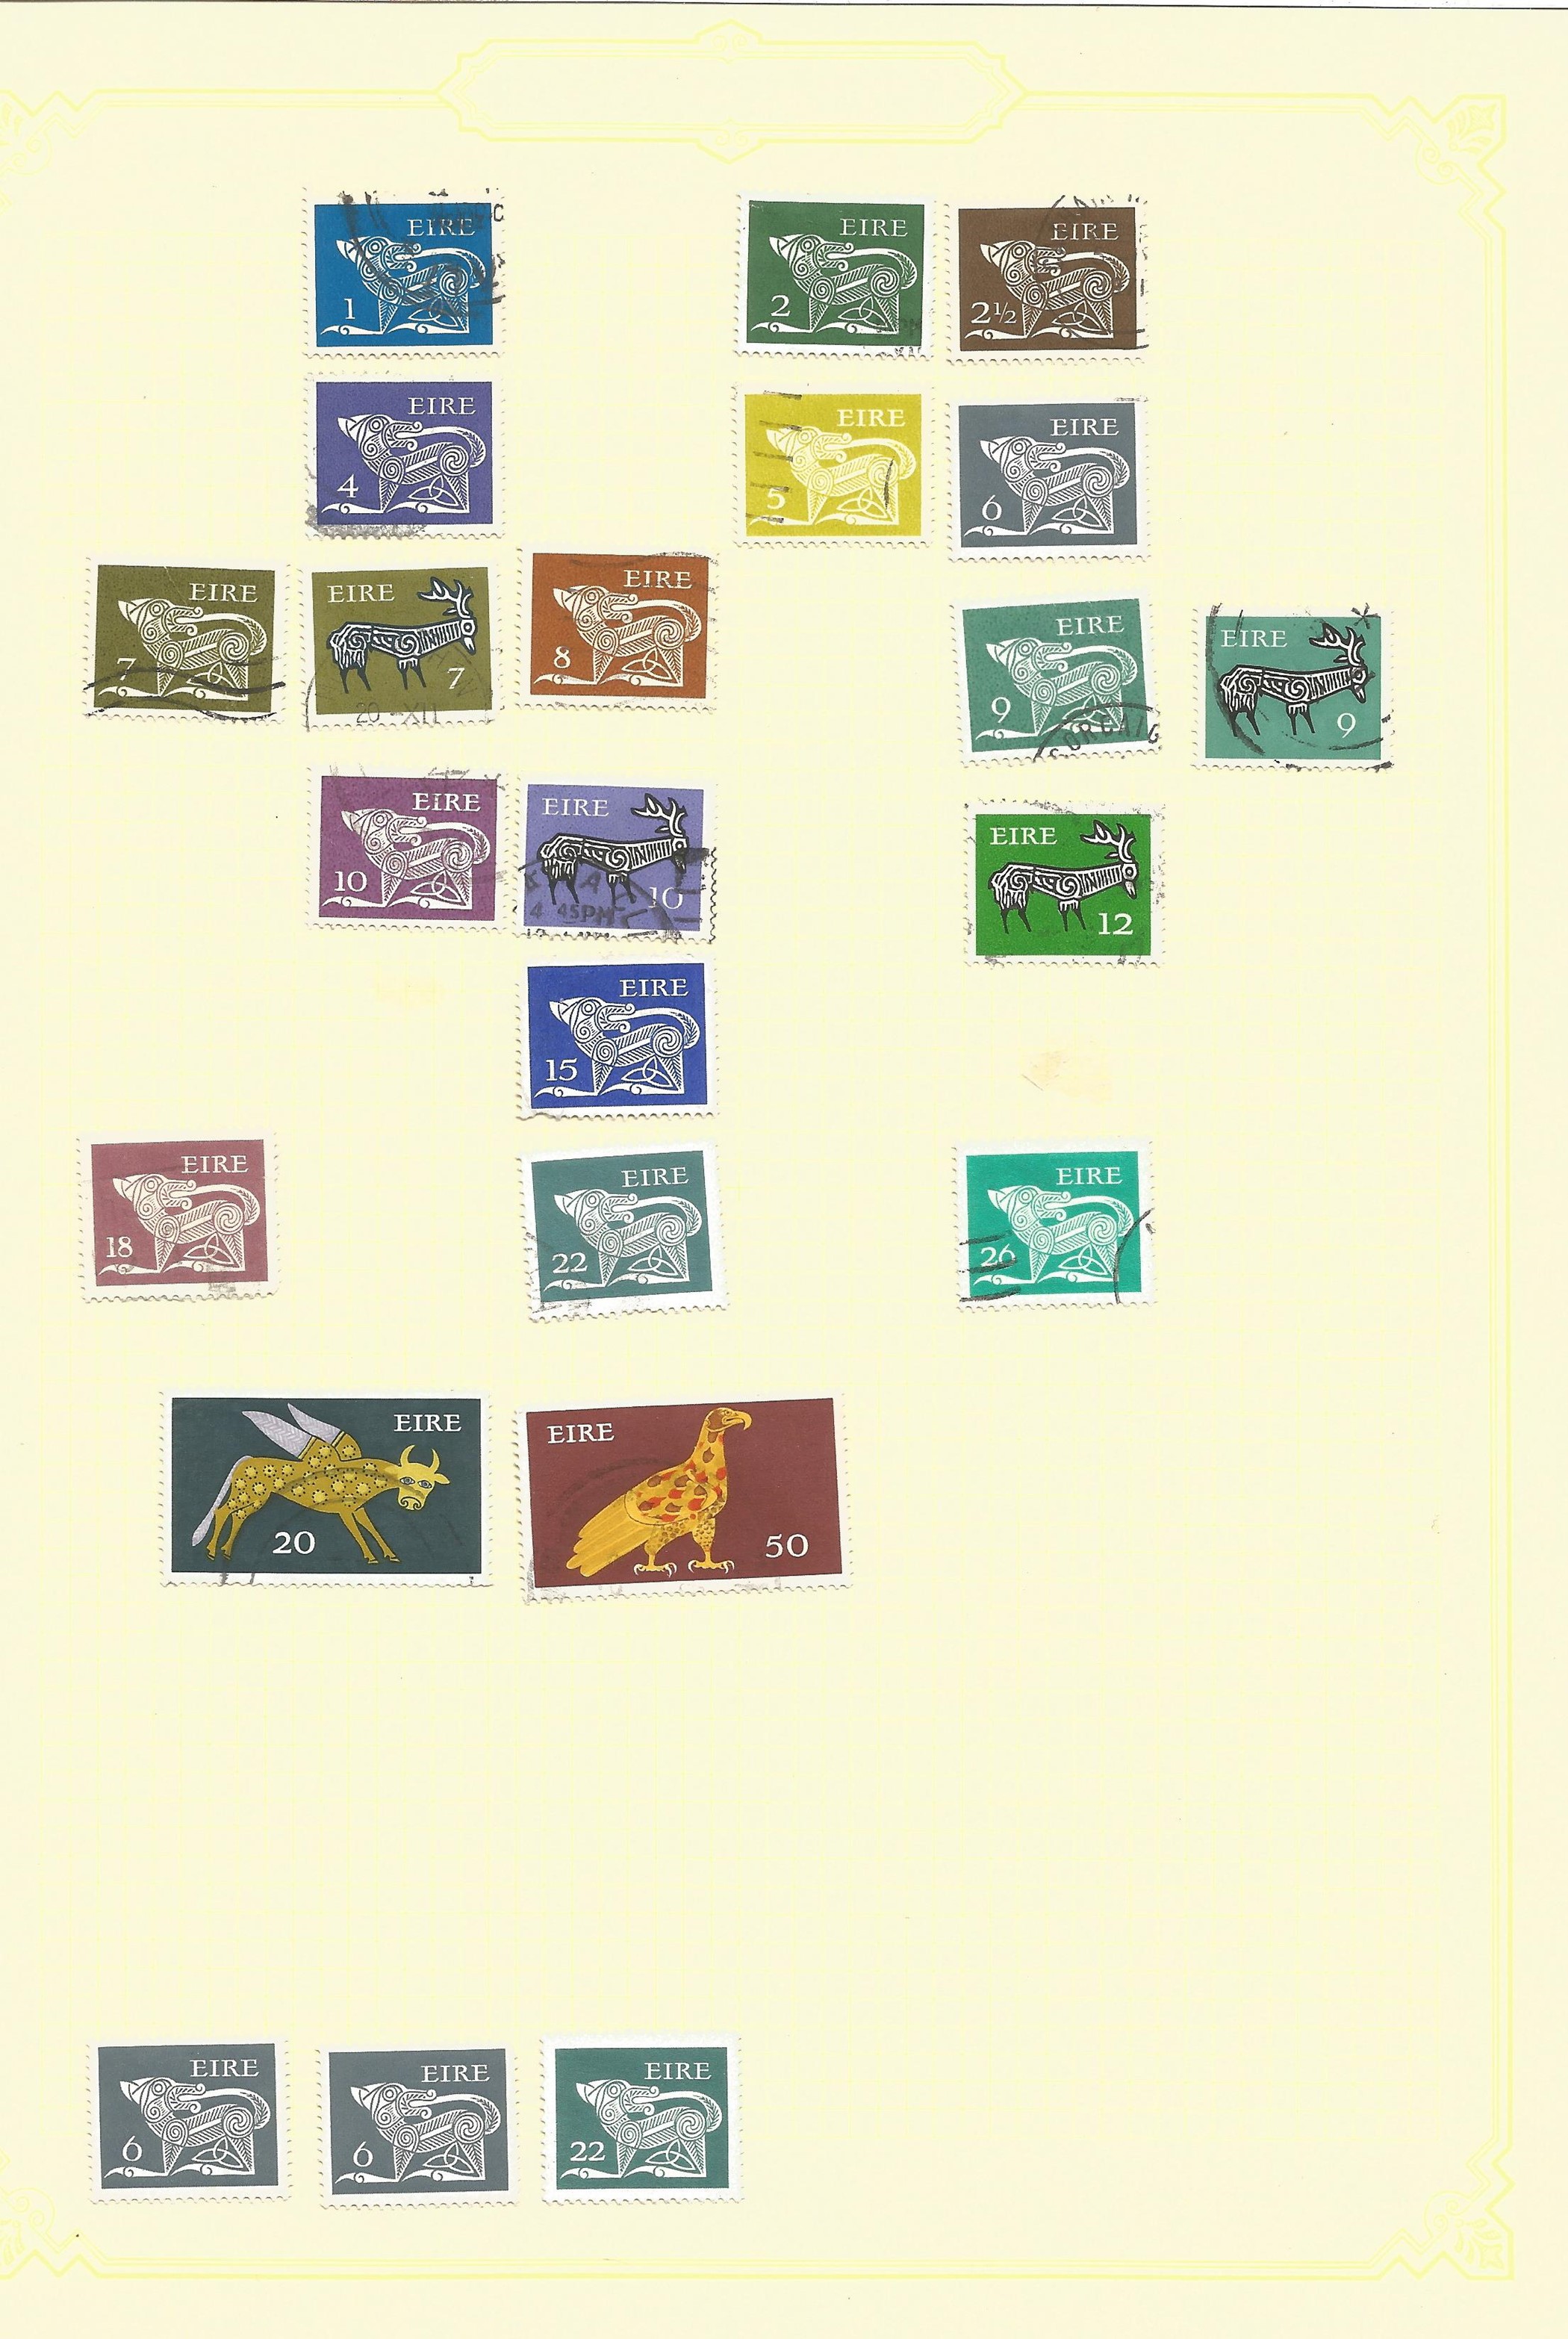 BCW stamp collection over 7 loose album pages. Including Tanzania, Tanganyika, Trinidad and